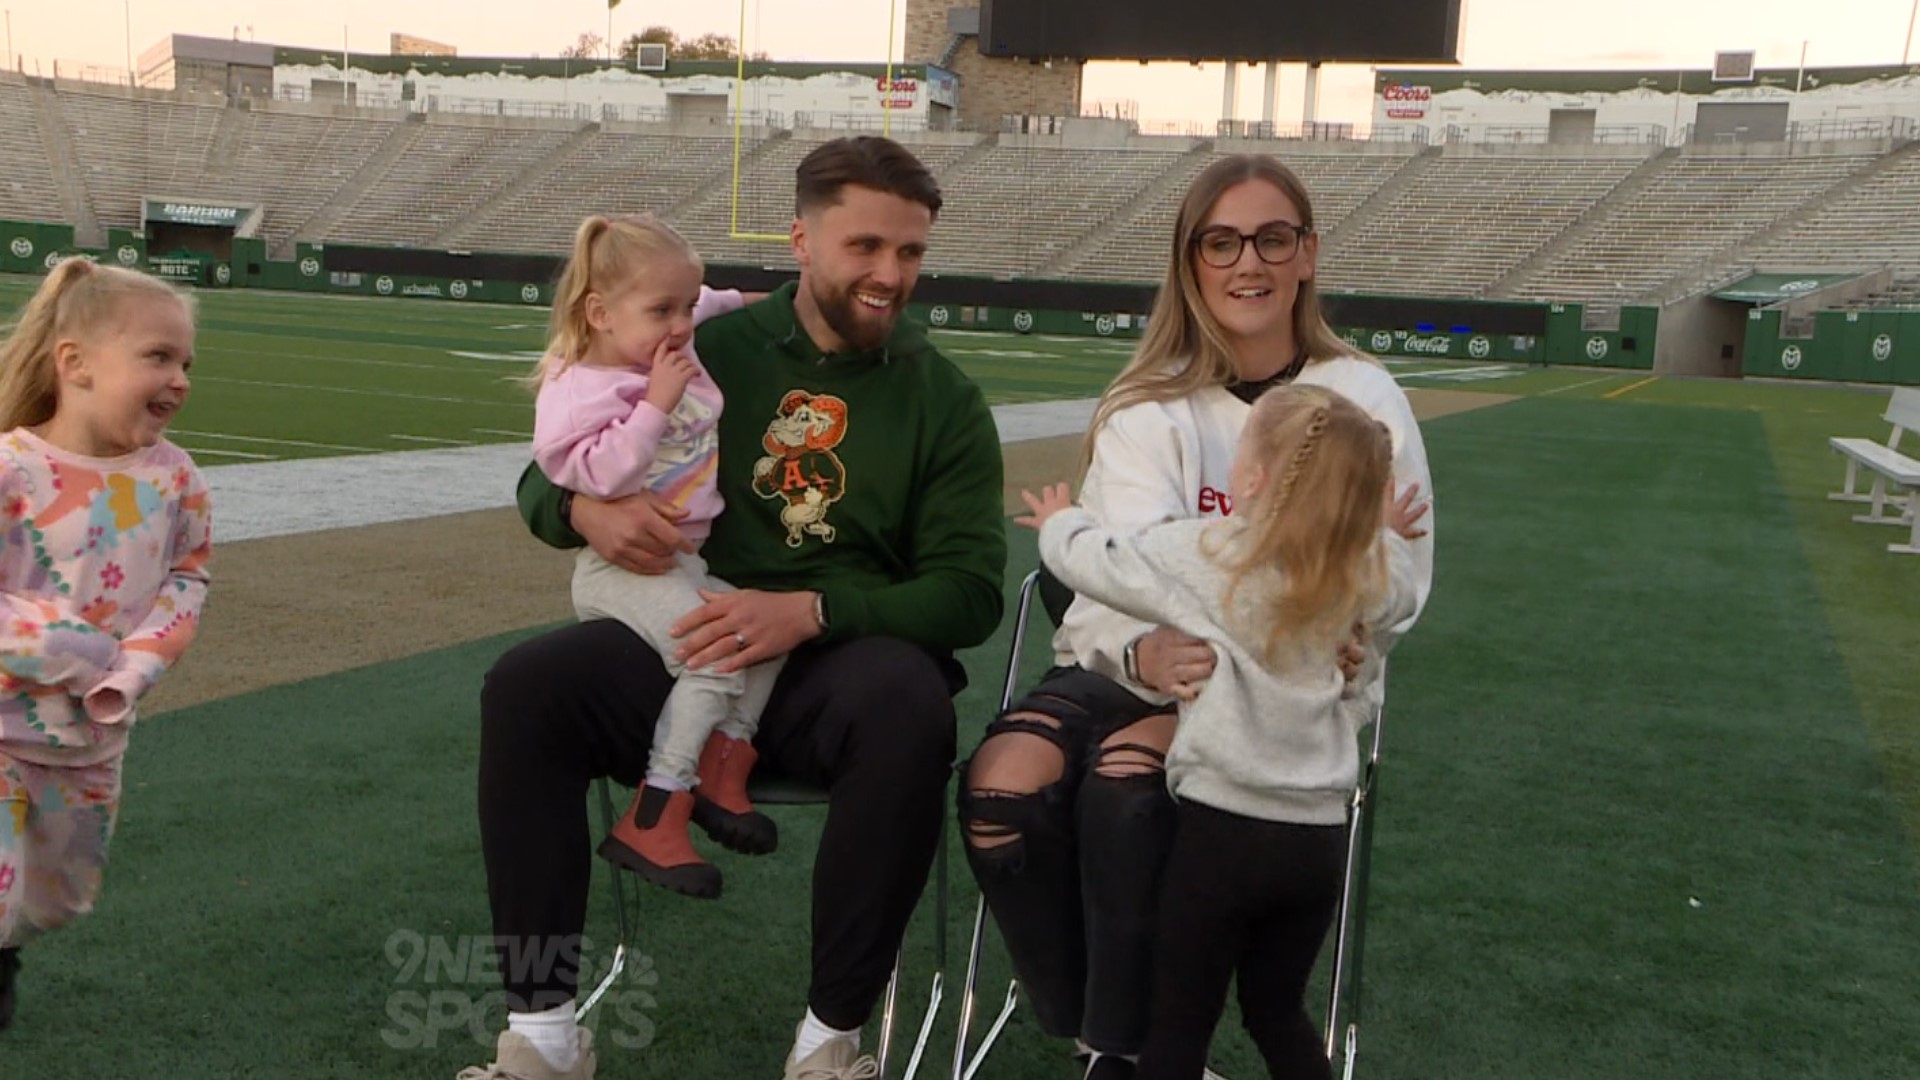 The 31-year-old kicker with a wife and three children has found an international home with the Rams.